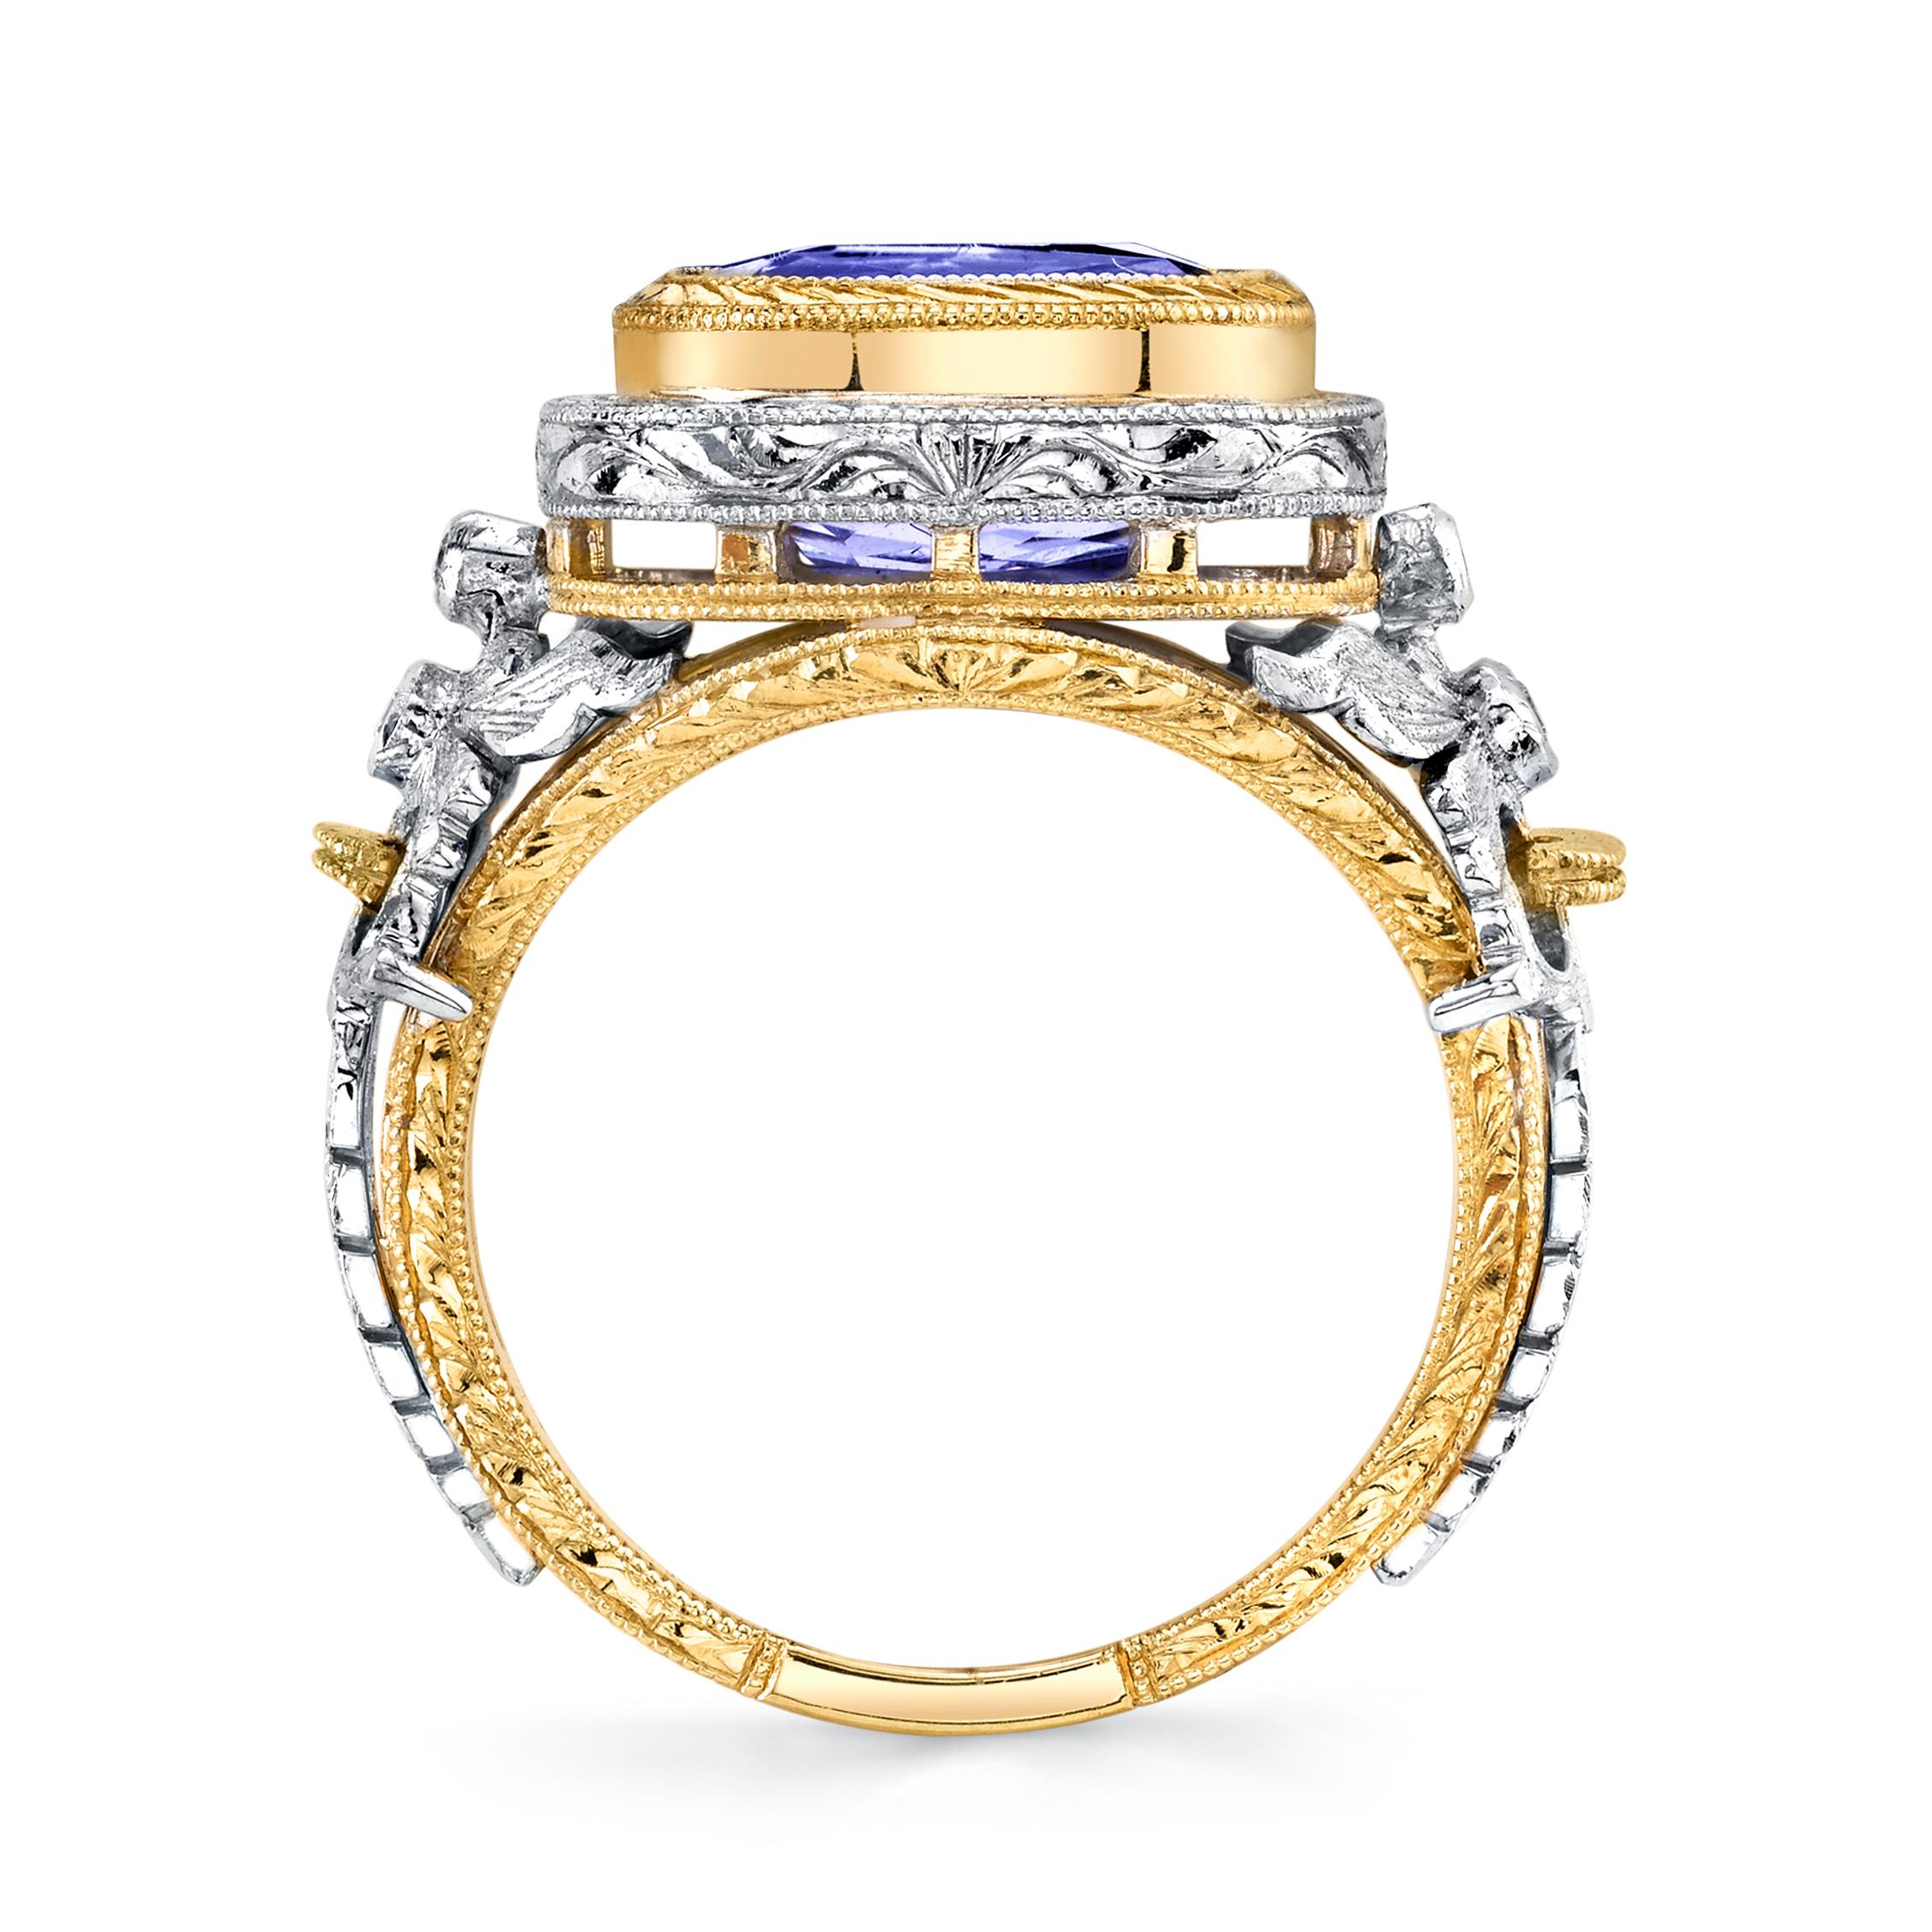 This exquisitely handmade 18k white and yellow gold ring features a gem 4.04 carat tanzanite in a multi-layered, hand engraved 18k yellow gold bezel. The cushion-shaped tanzanite center stone has gorgeous color and is set 